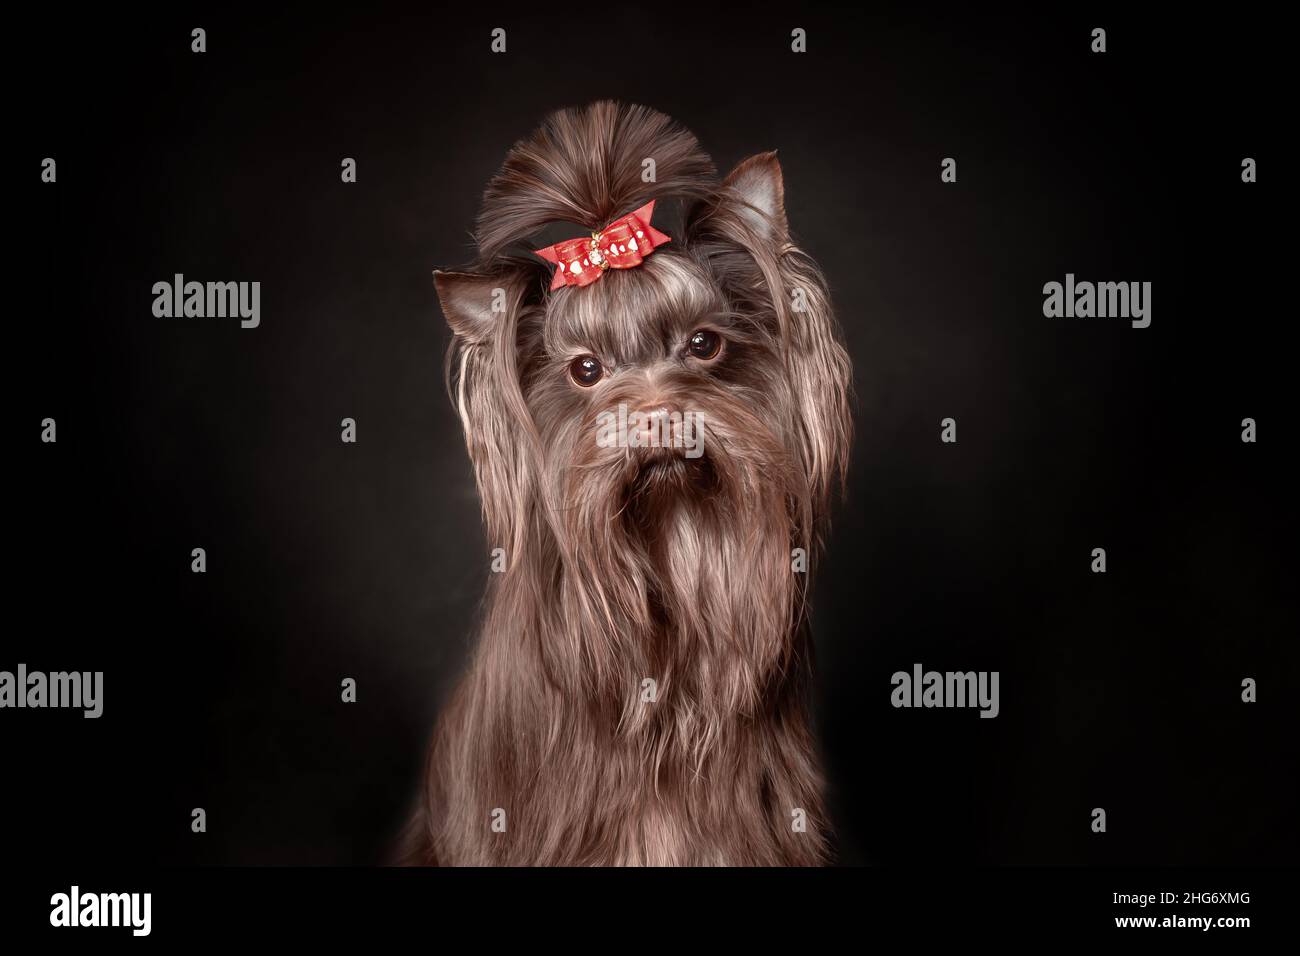 Closeup portrait of face of beautiful sad Yorkshire terrier dog chocolate color with red hair bow on a black background Stock Photo